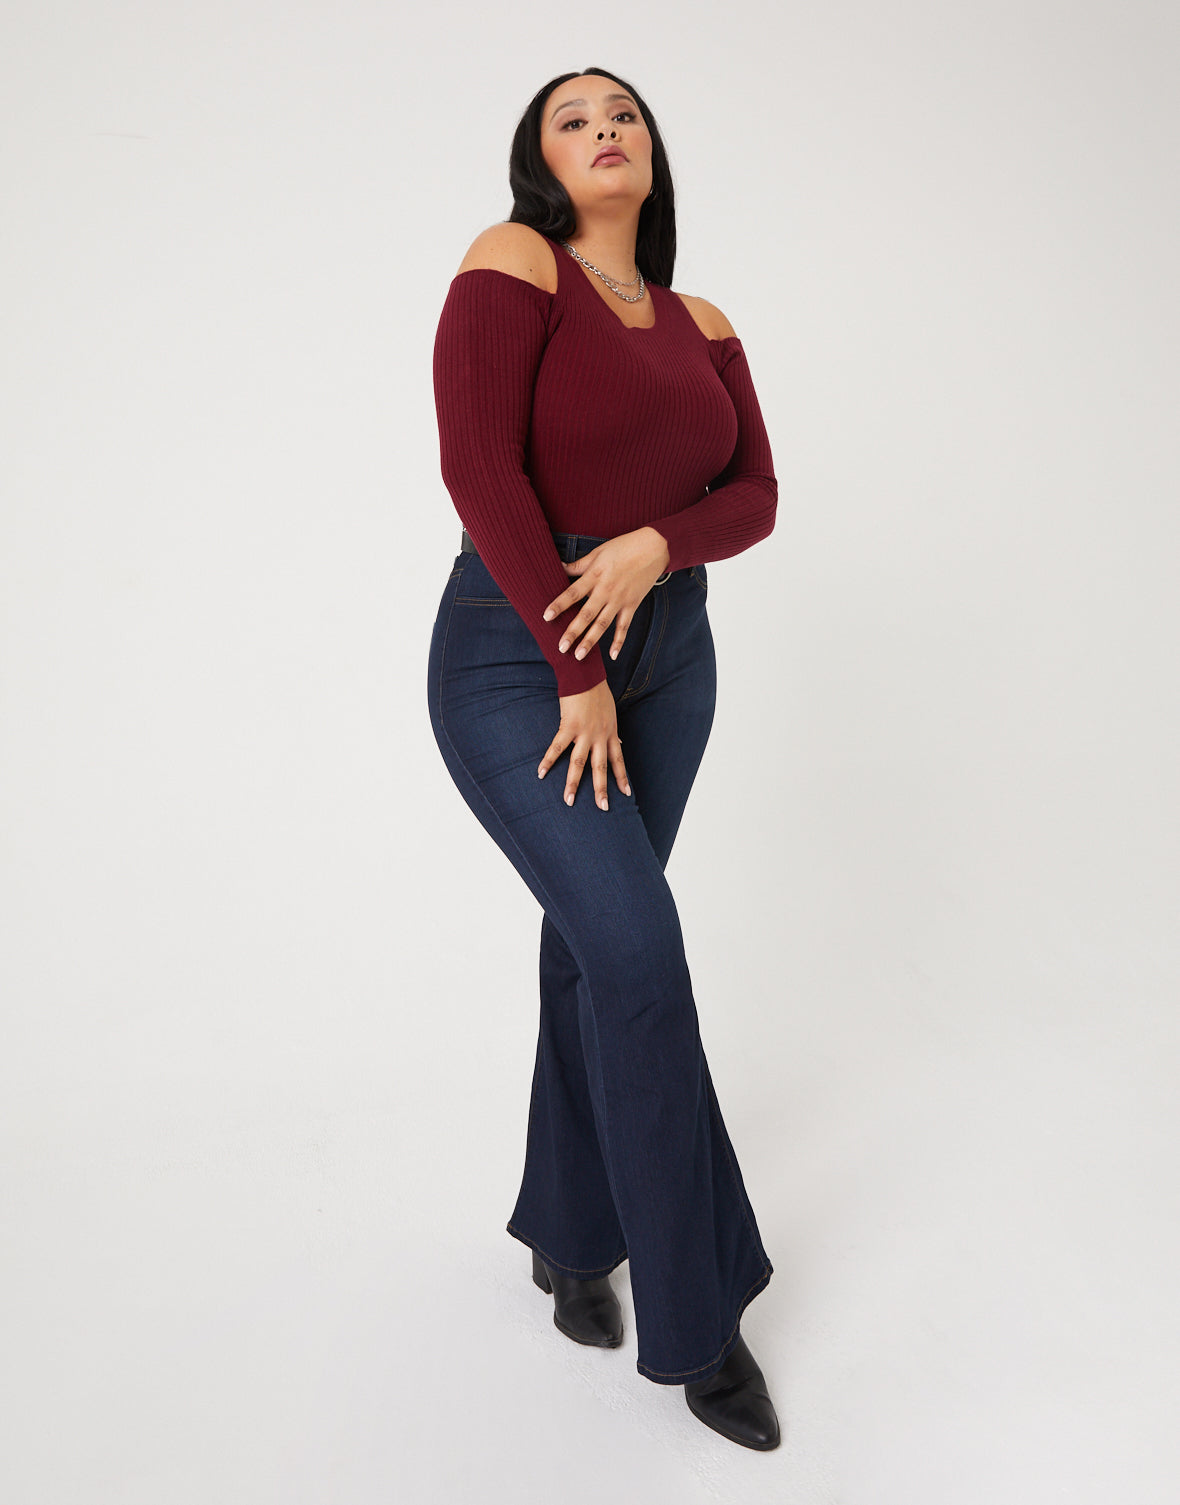 Plus Size 70s Girl Flared Jeans - Plus Size Bell Bottom Jeans